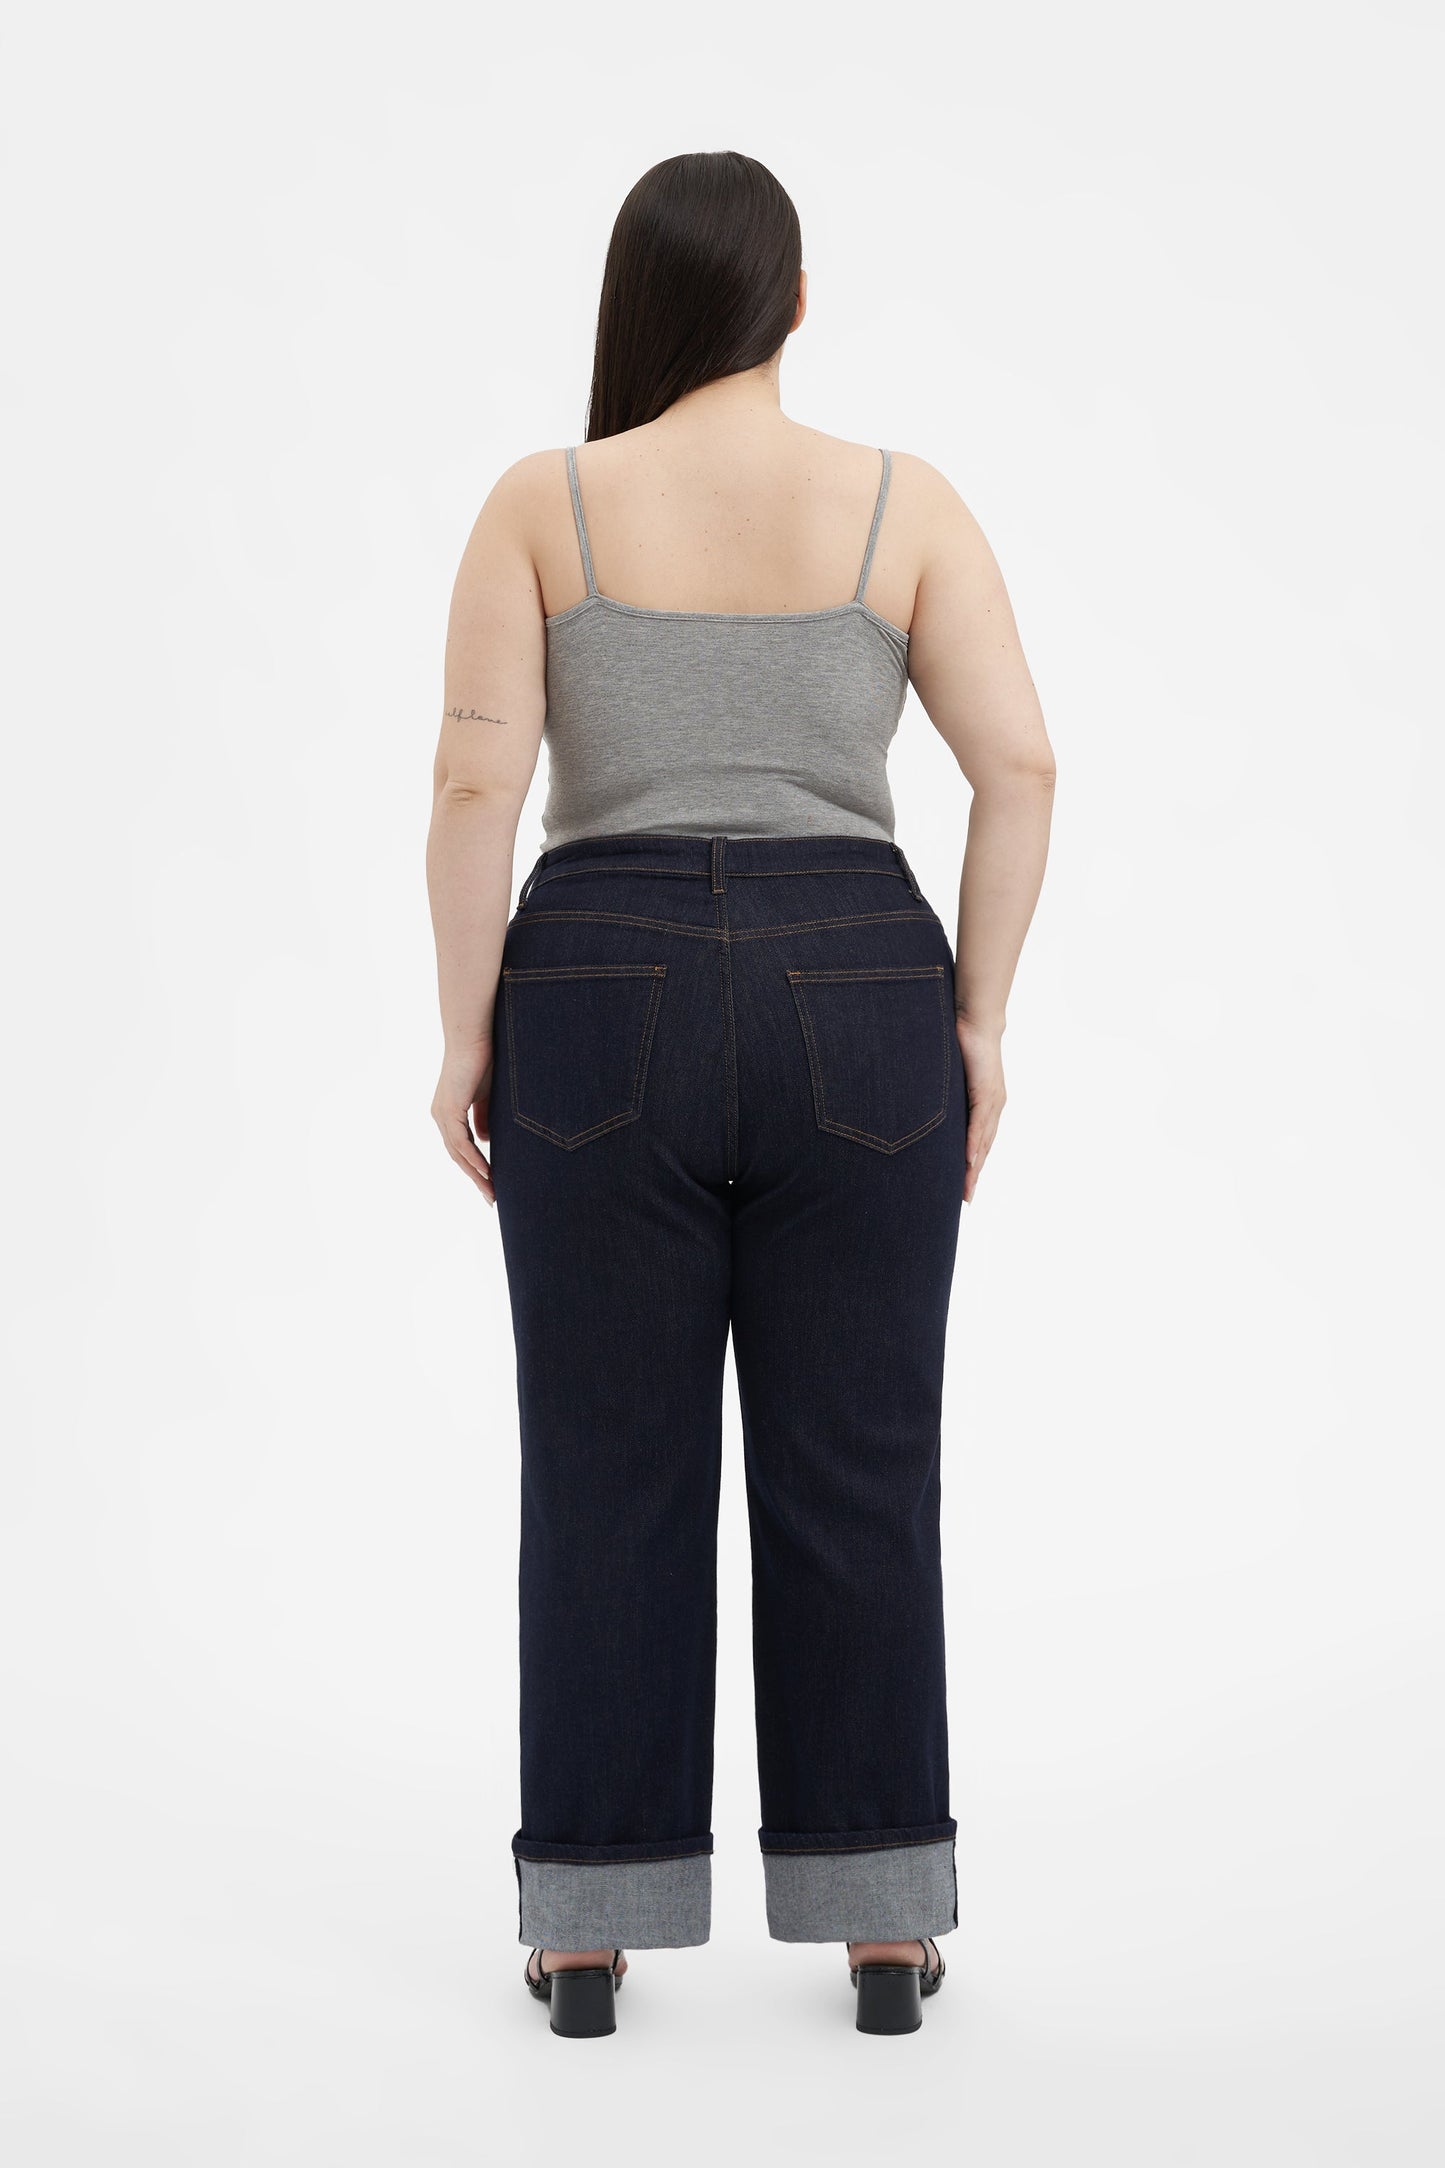 HIGH RISE STRAIGHT JEANS BYT5182-P (BYHE035-P) RINSE PLUS SIZE